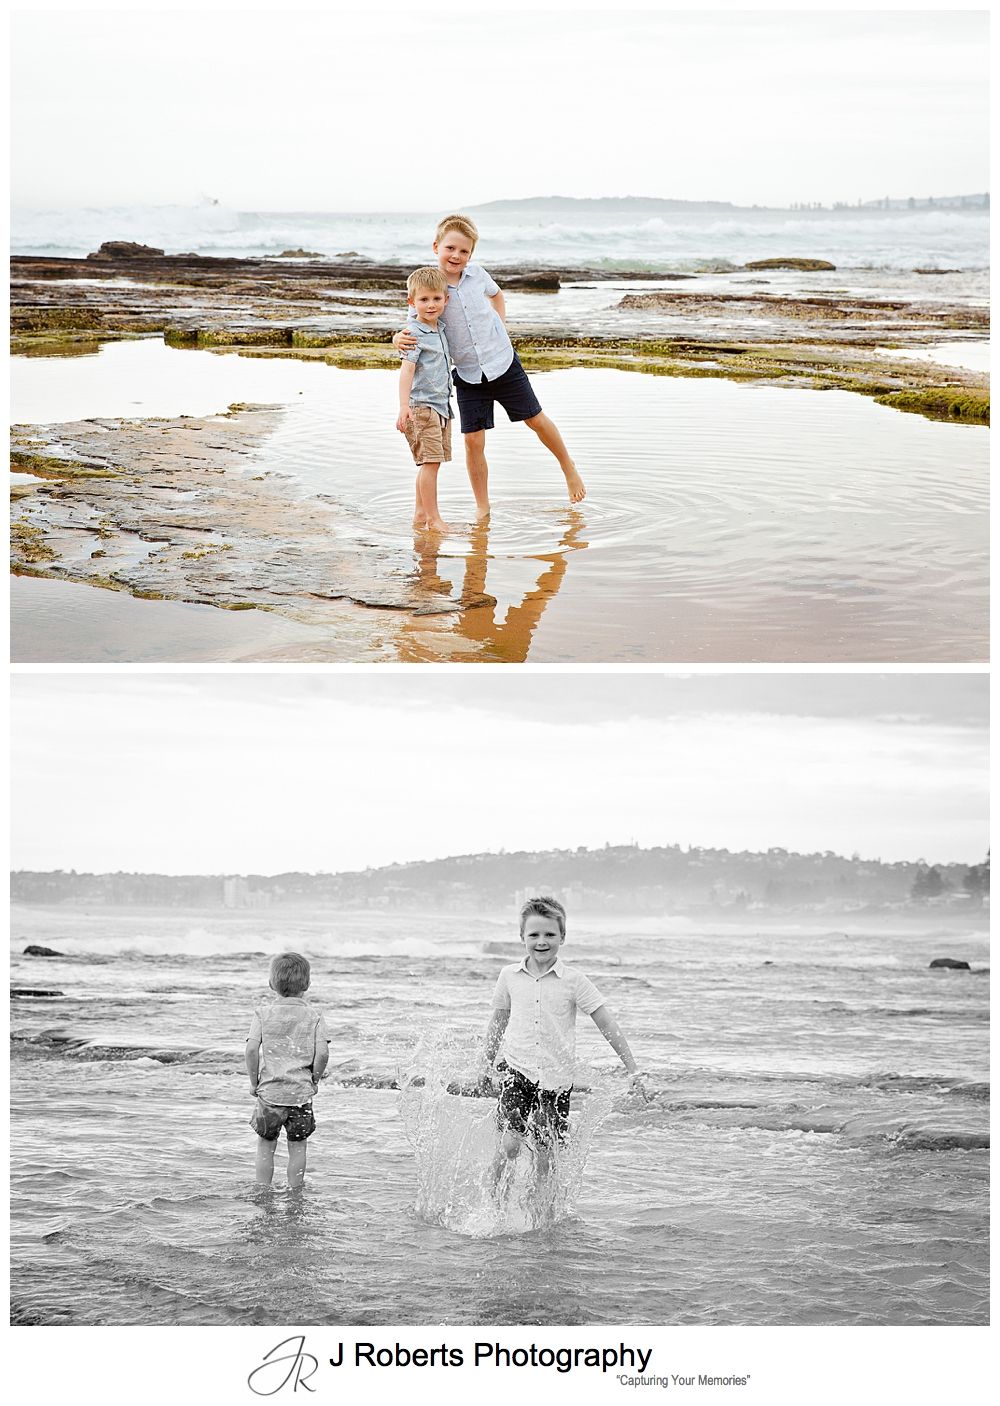 Sydney Northern Beaches Photography of Extended Family at North Narrabeen Rockpool